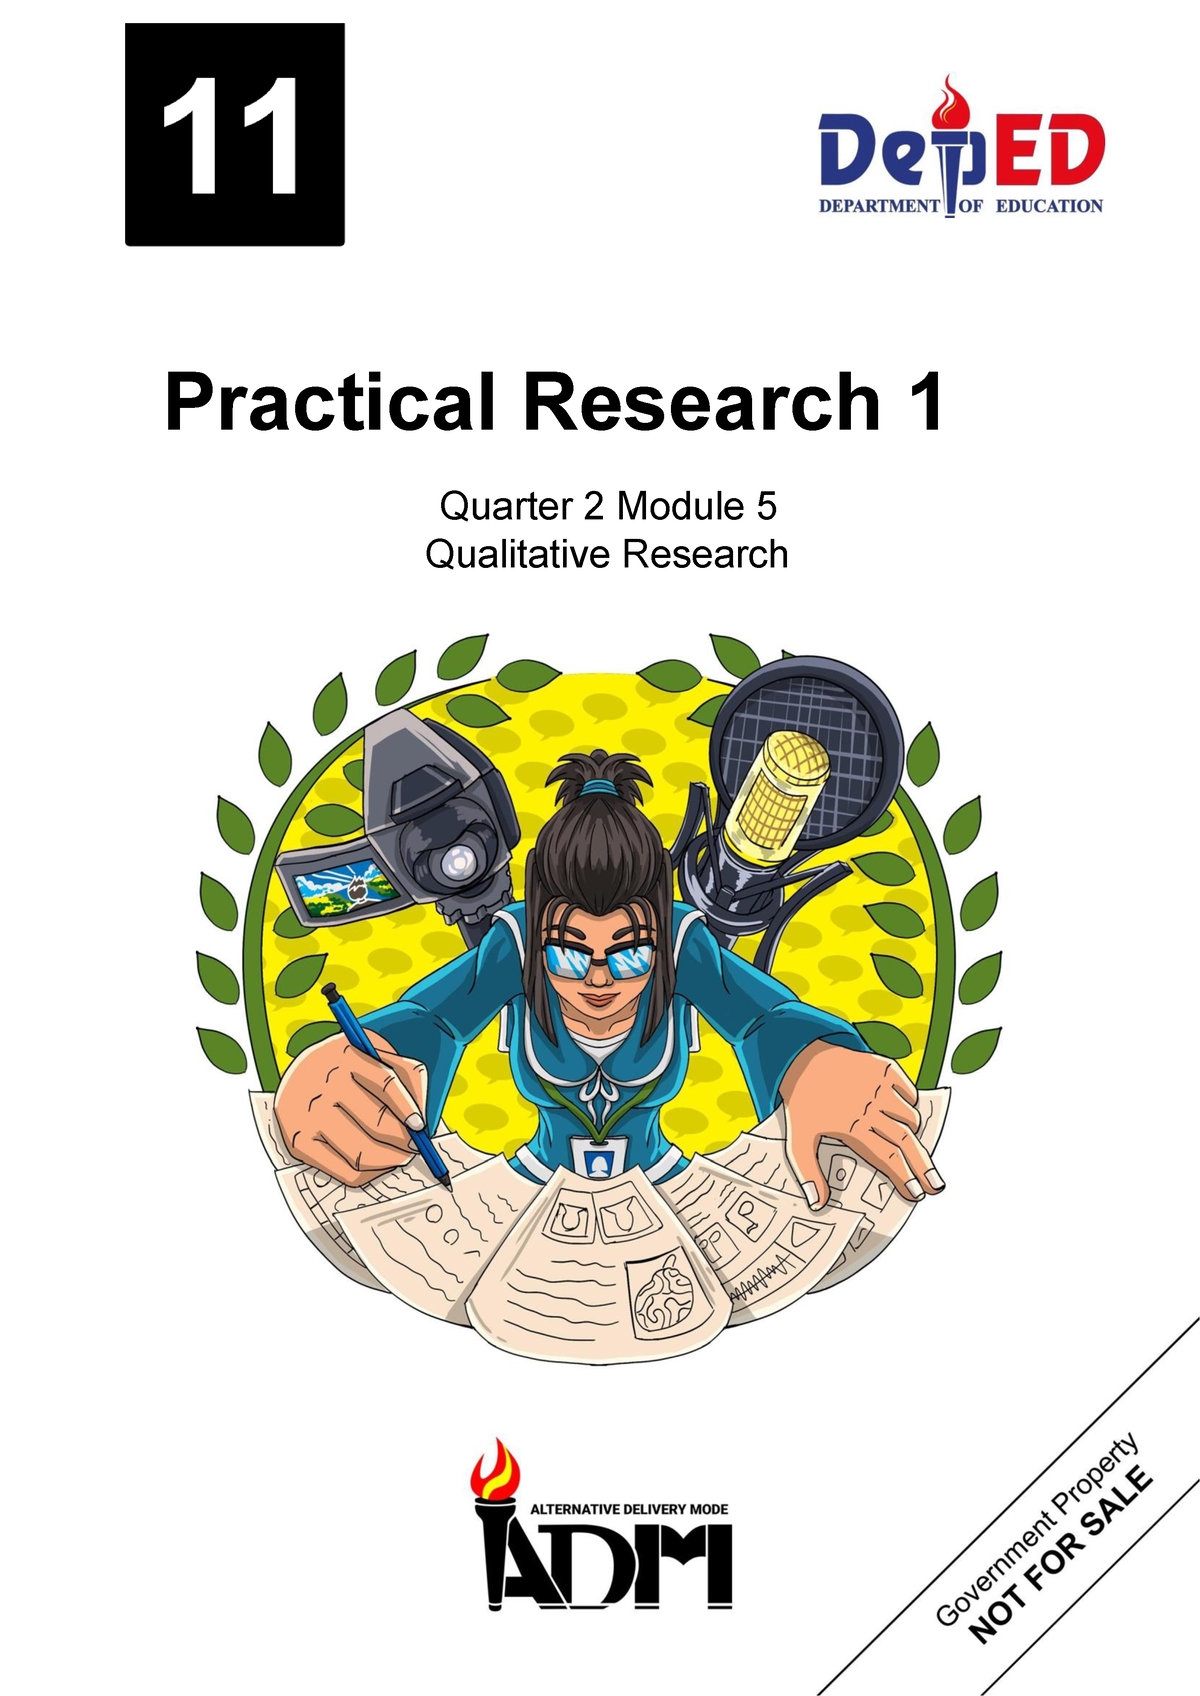 Signed Off Practical Research 1 G11 Q2 Mod5 Practical Research 1 Quarter 2 Module 5 2773